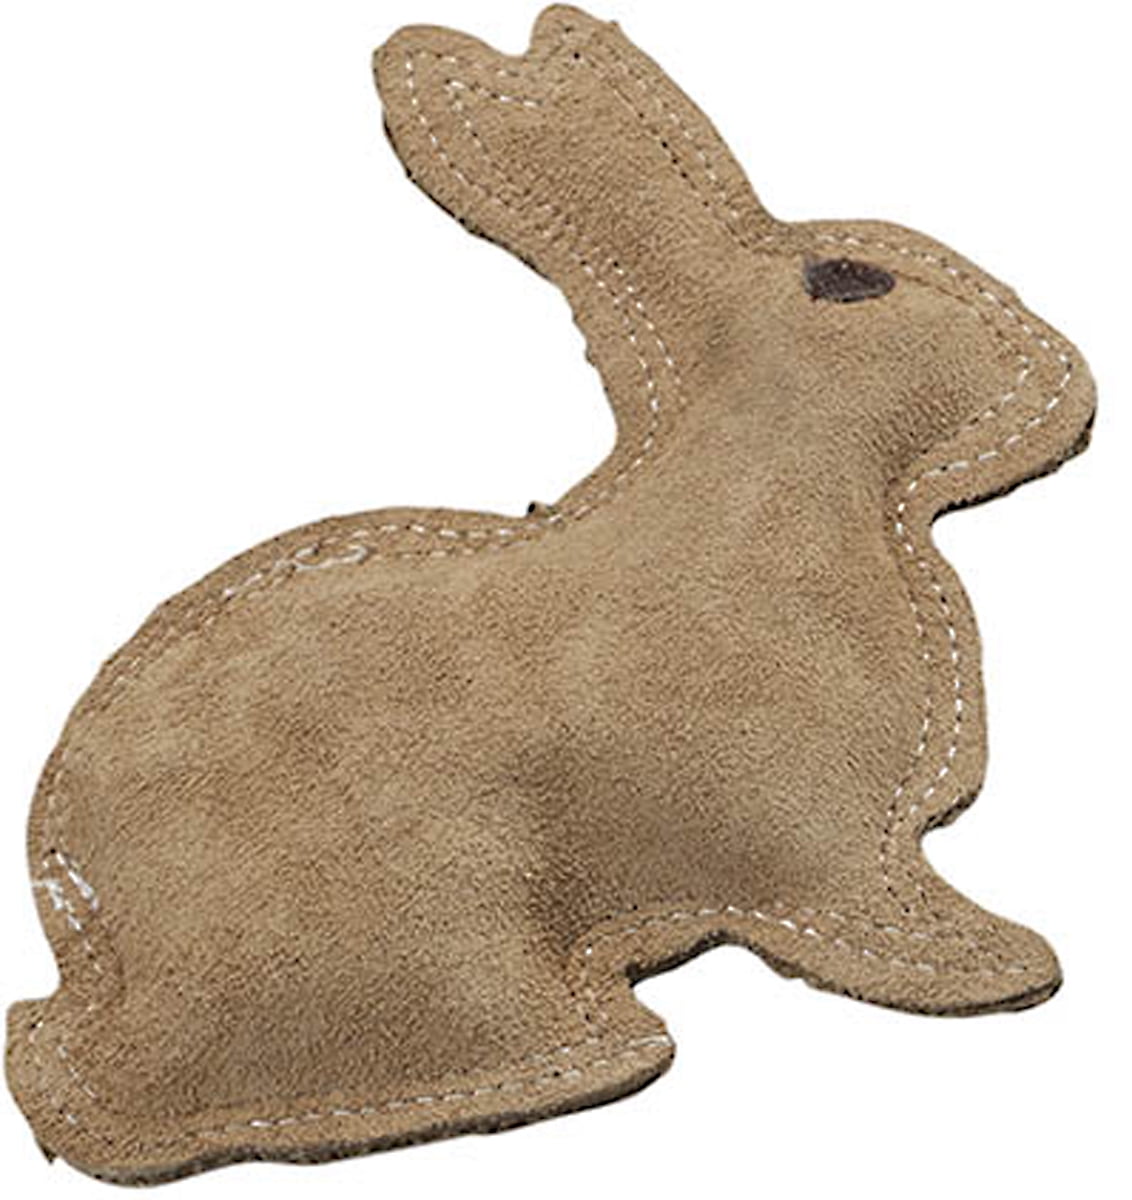 SPOT Dura-fused Rabbit Durable Leather 